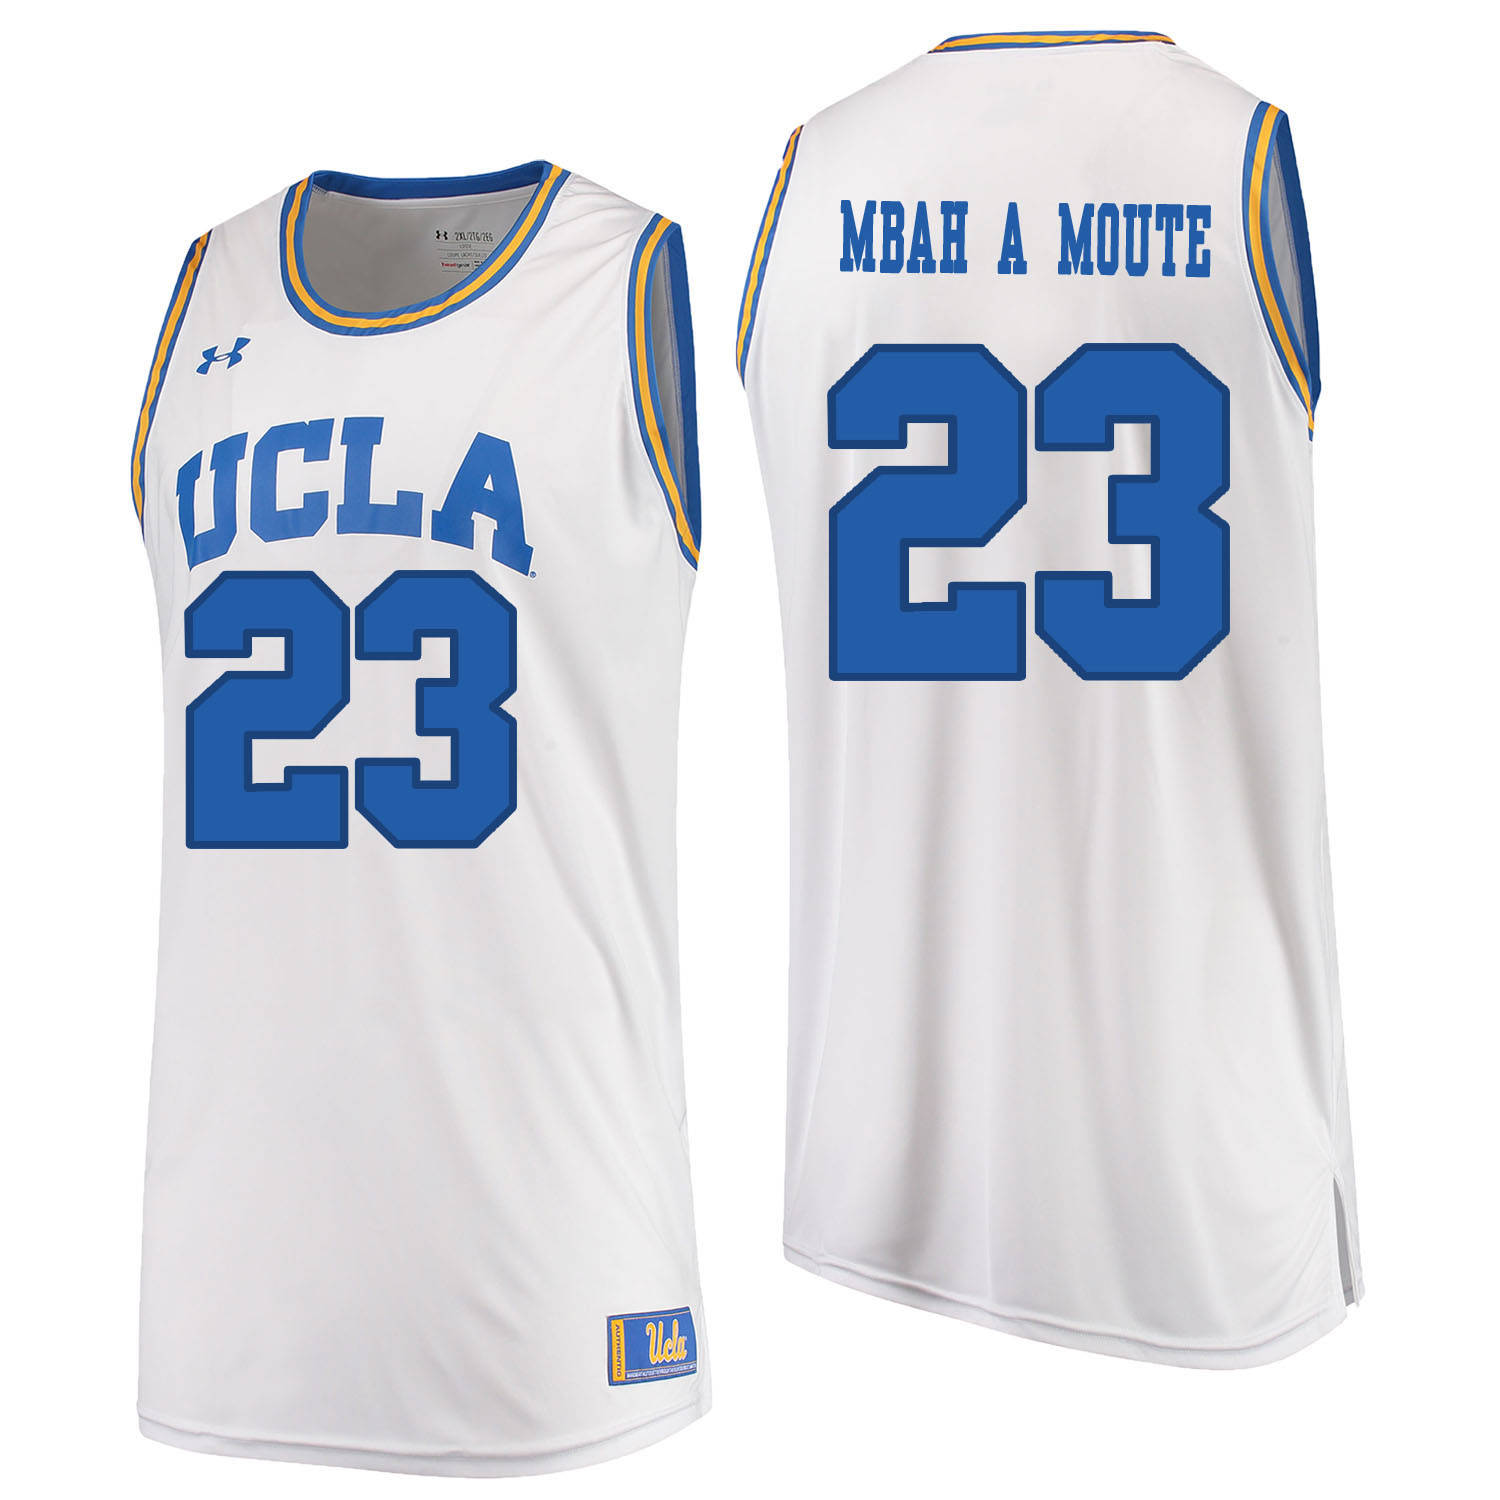 UCLA Bruins 23 Luc Mabh a Mouth White College Basketball Jersey